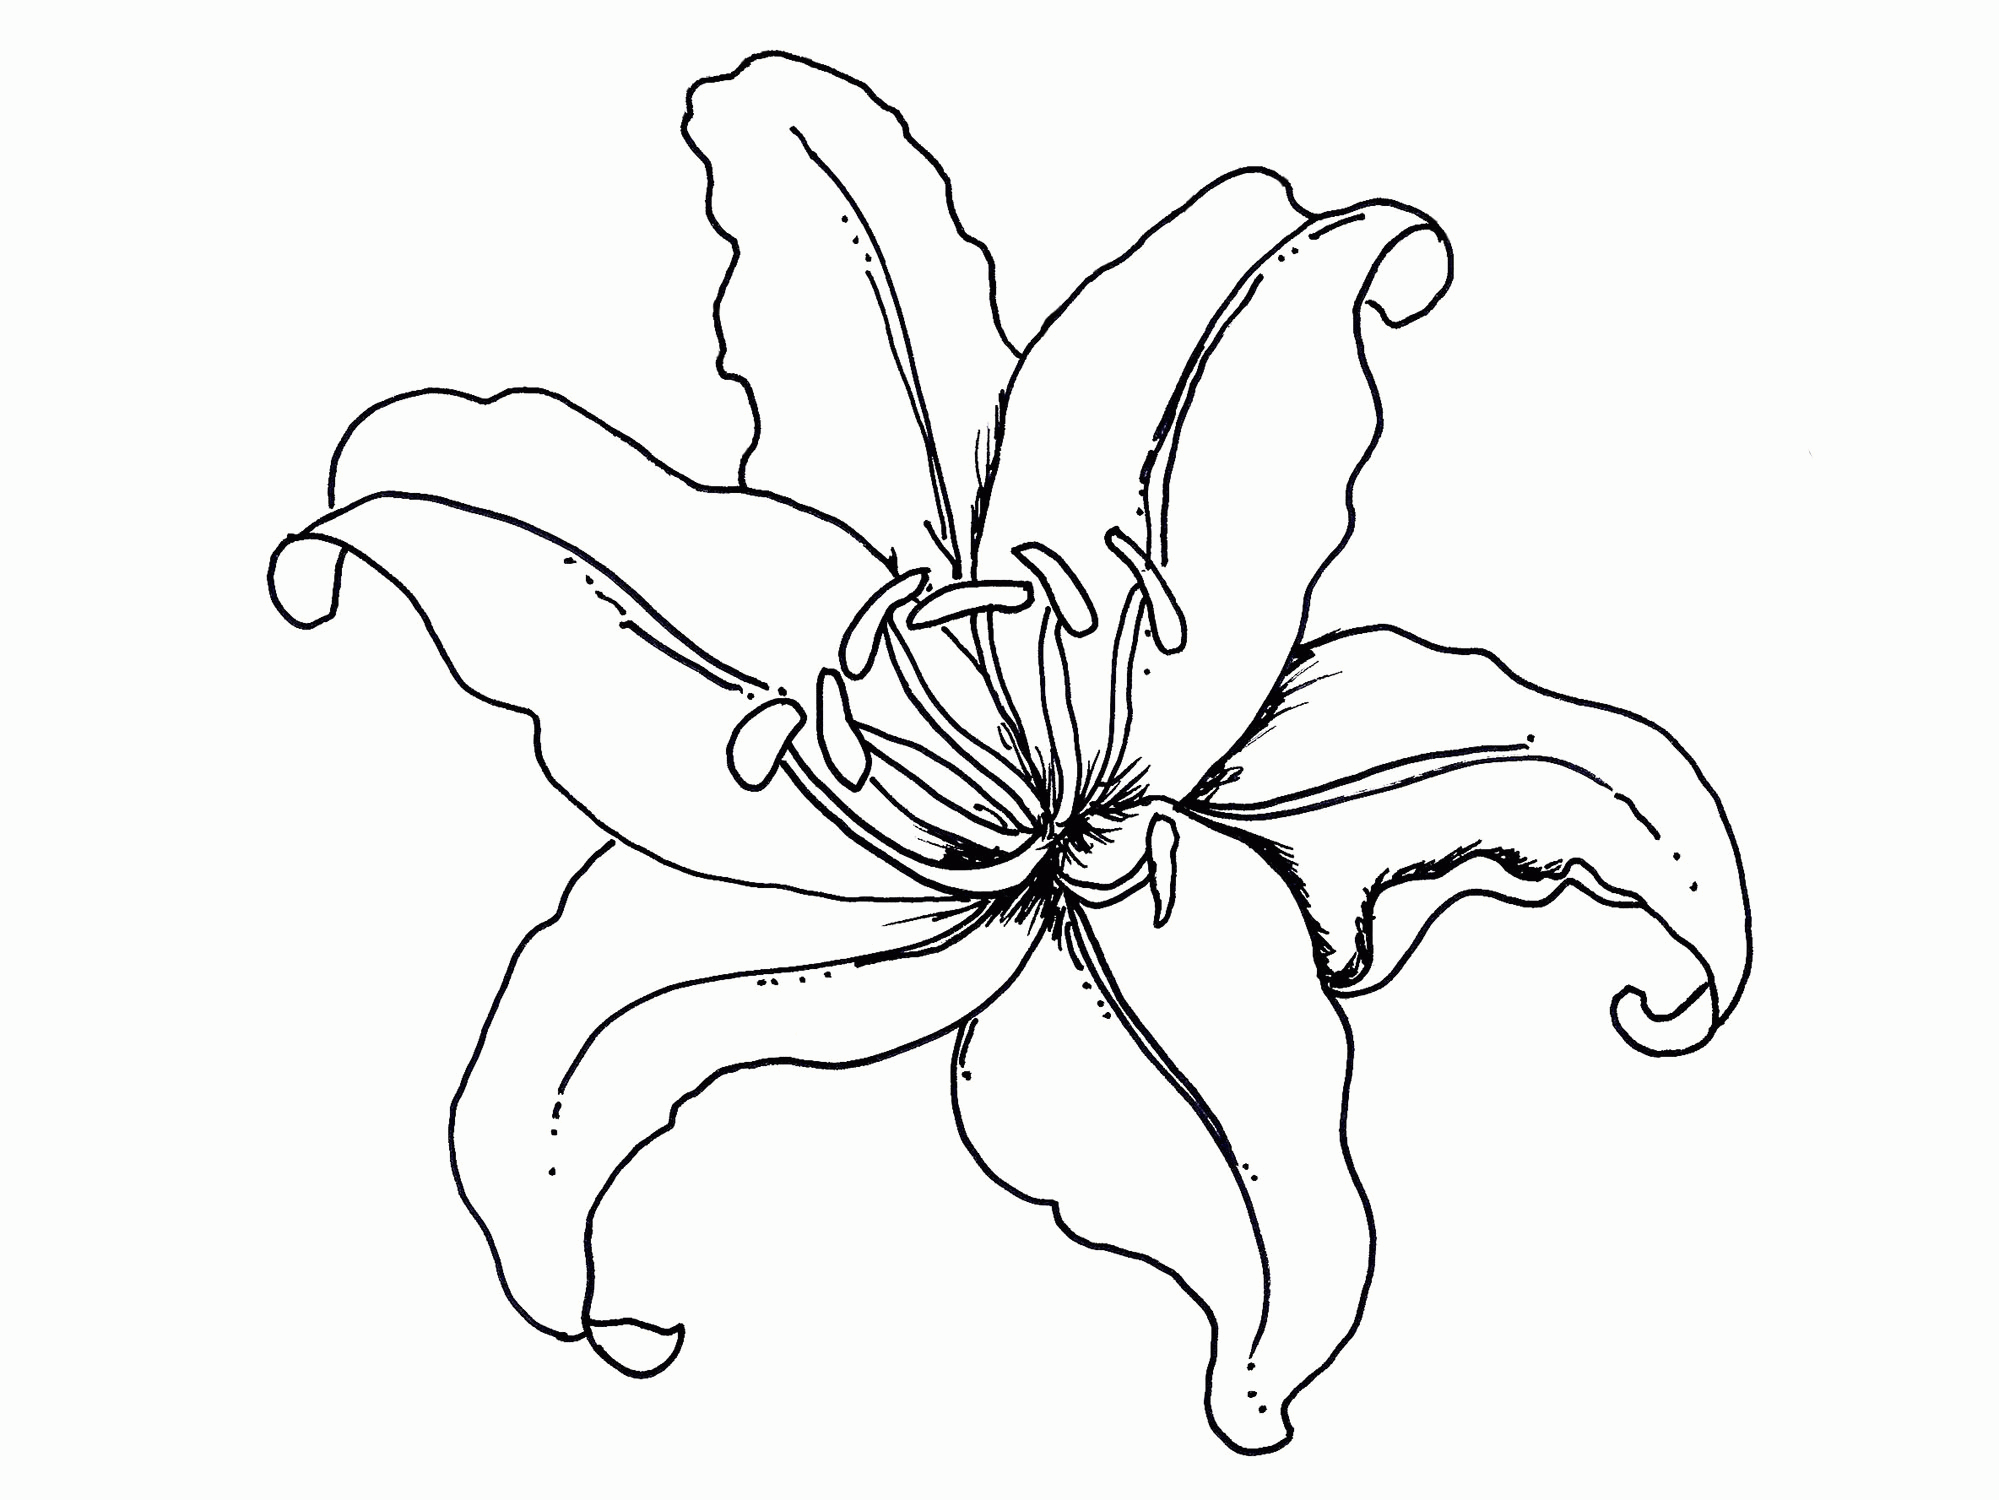 Flowers Coloring Pages (20 Pictures) - Colorine.net | 10327